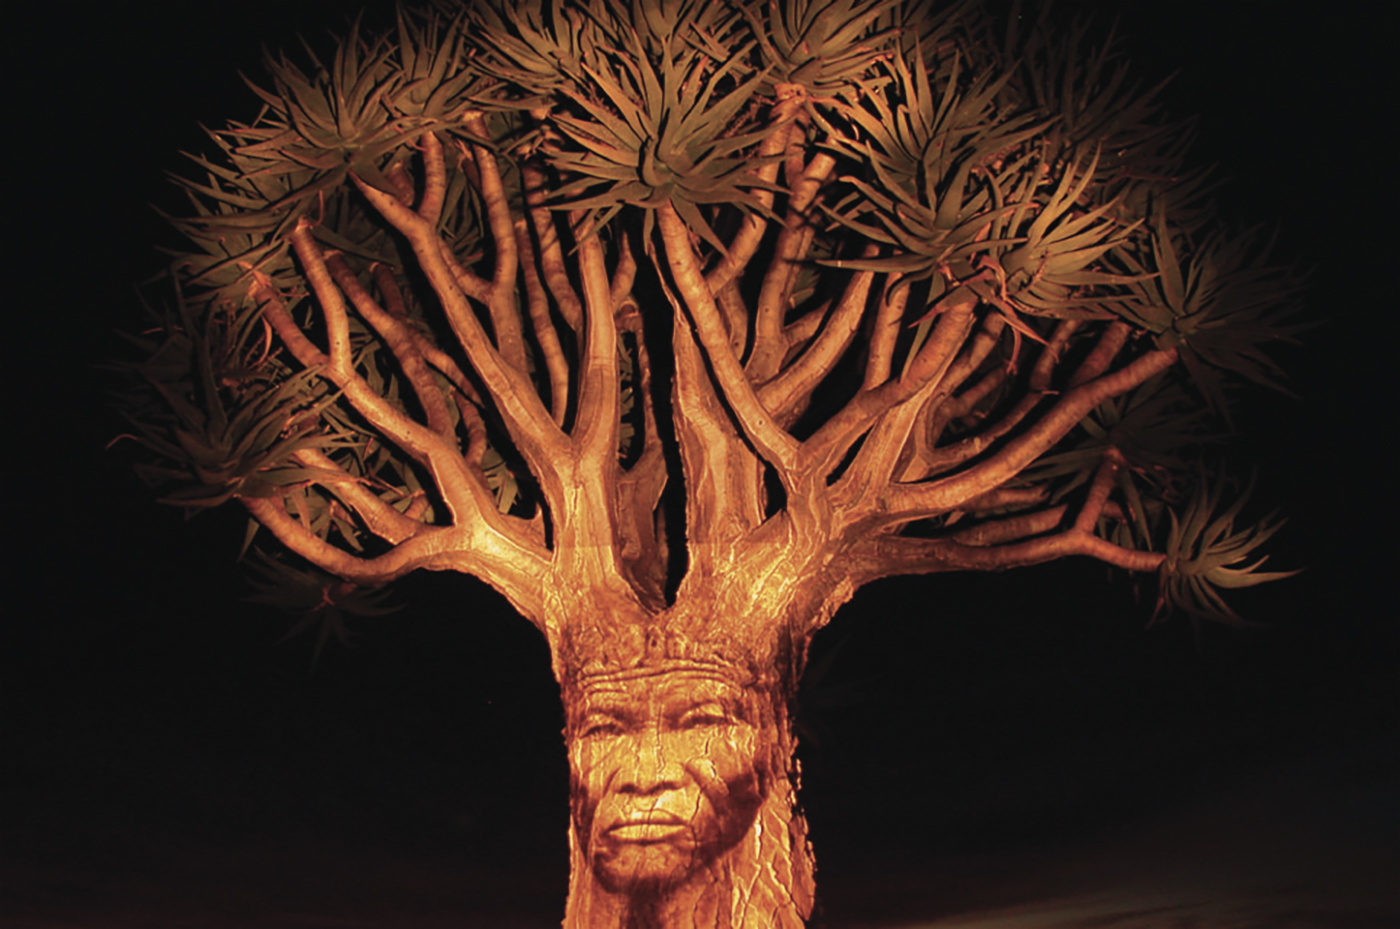 ǁKabbo’s face projected onto a quiver tree near Olifantvlei, at the southern end of the Flat Bushman territory marked on his map